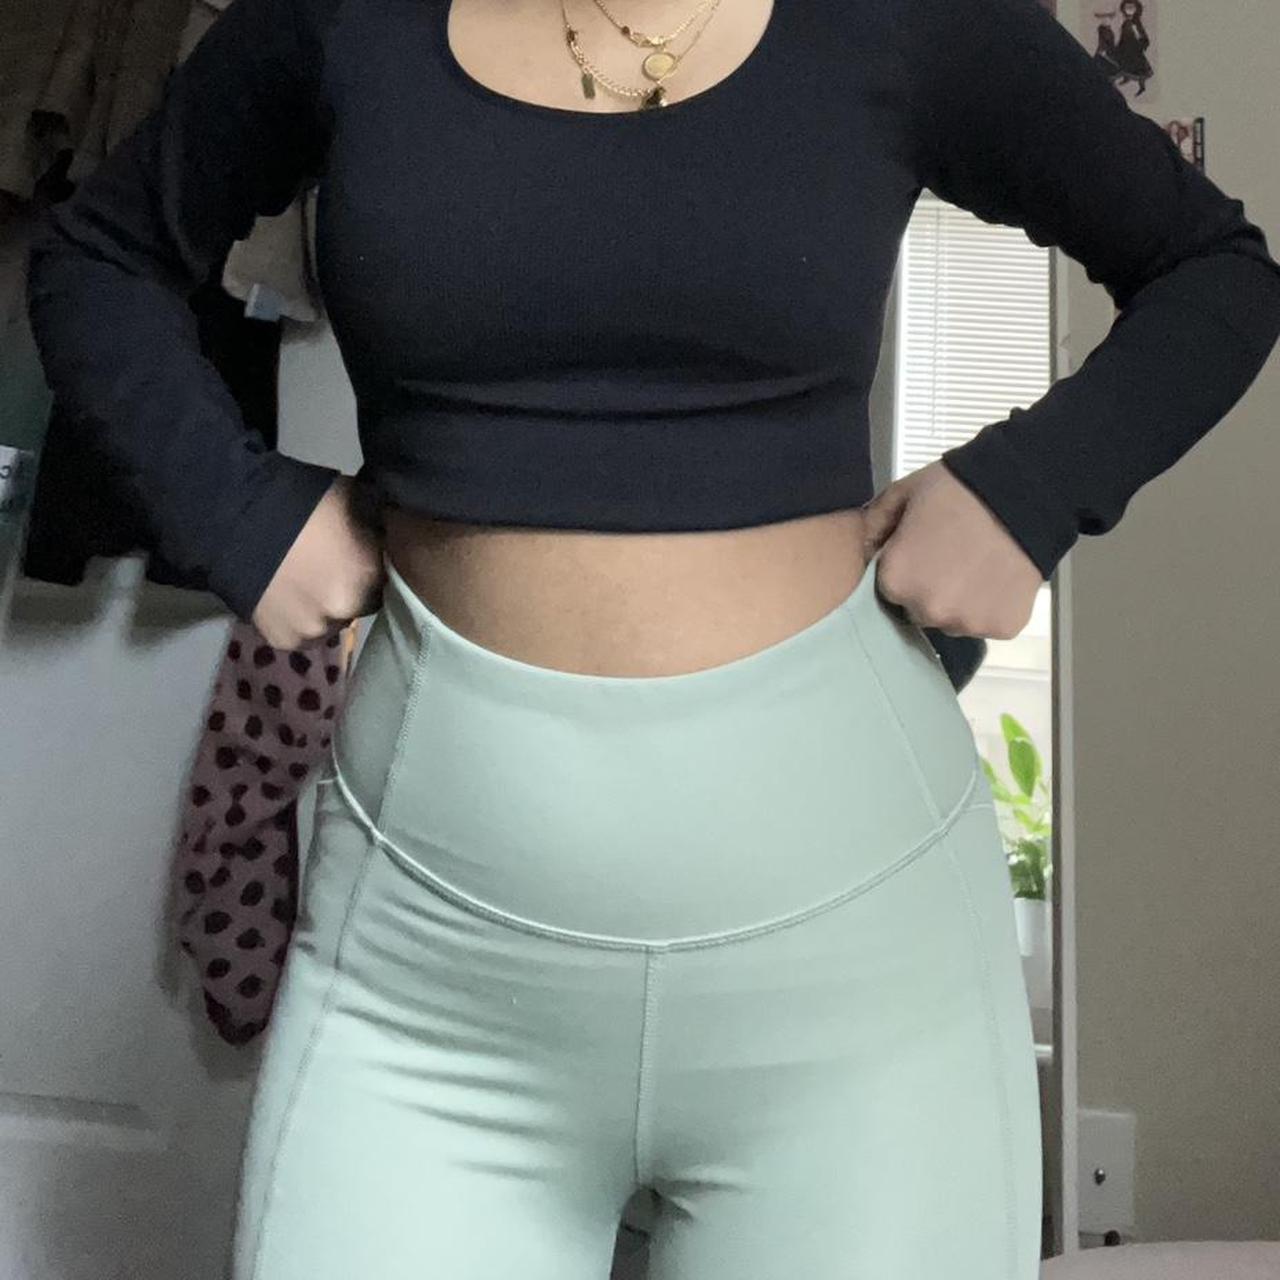 mint green workout leggings with cutouts all over. - Depop